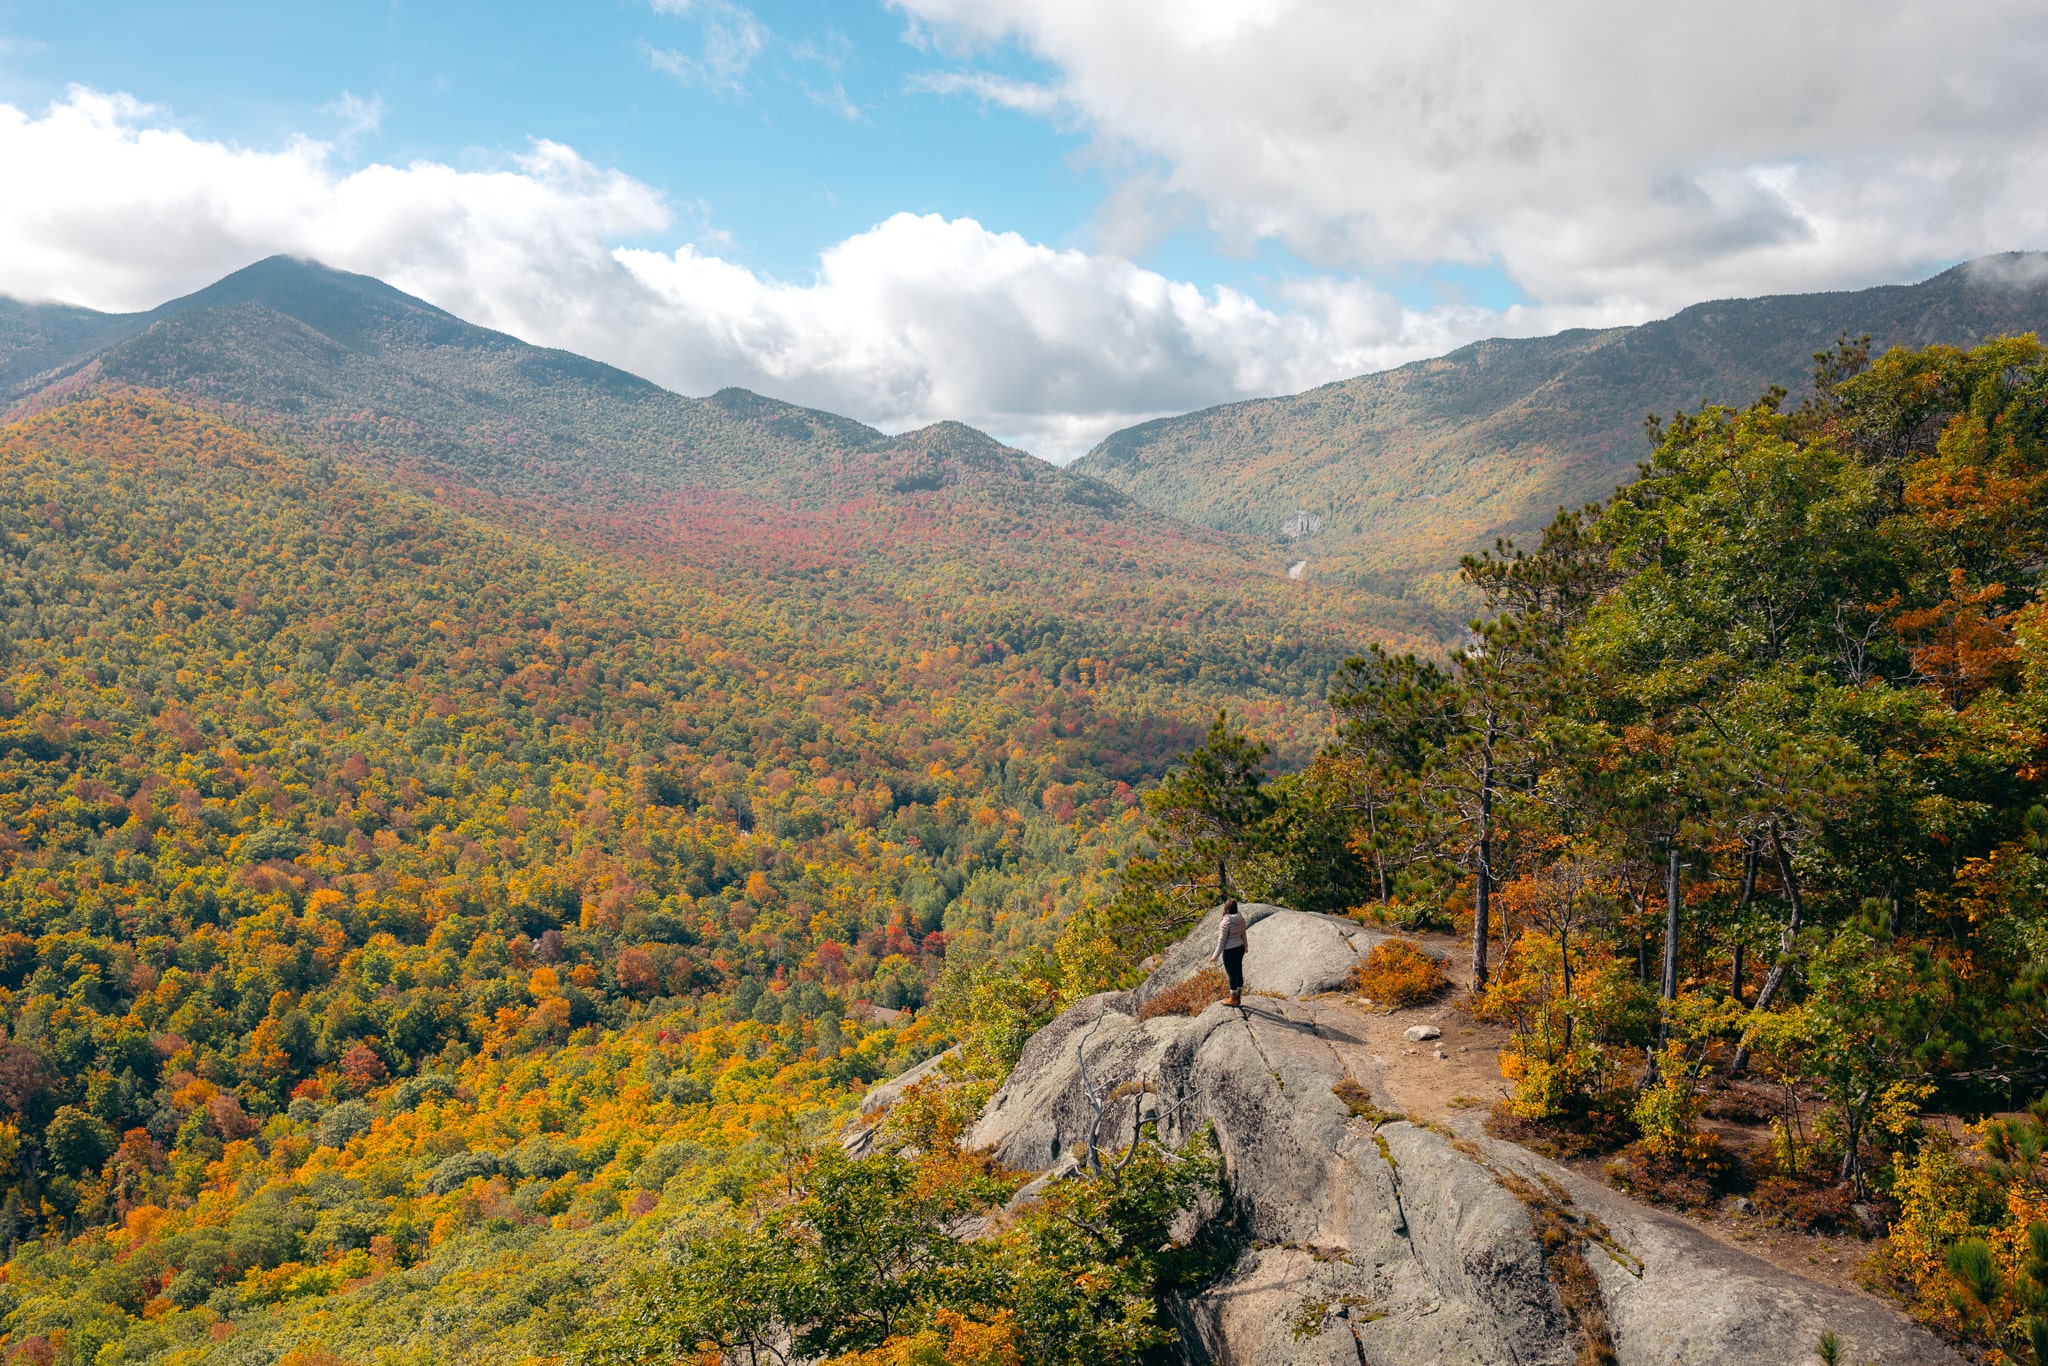 A hiker in the Adirondack Mountains, prepared with everything you should pack for a day hike